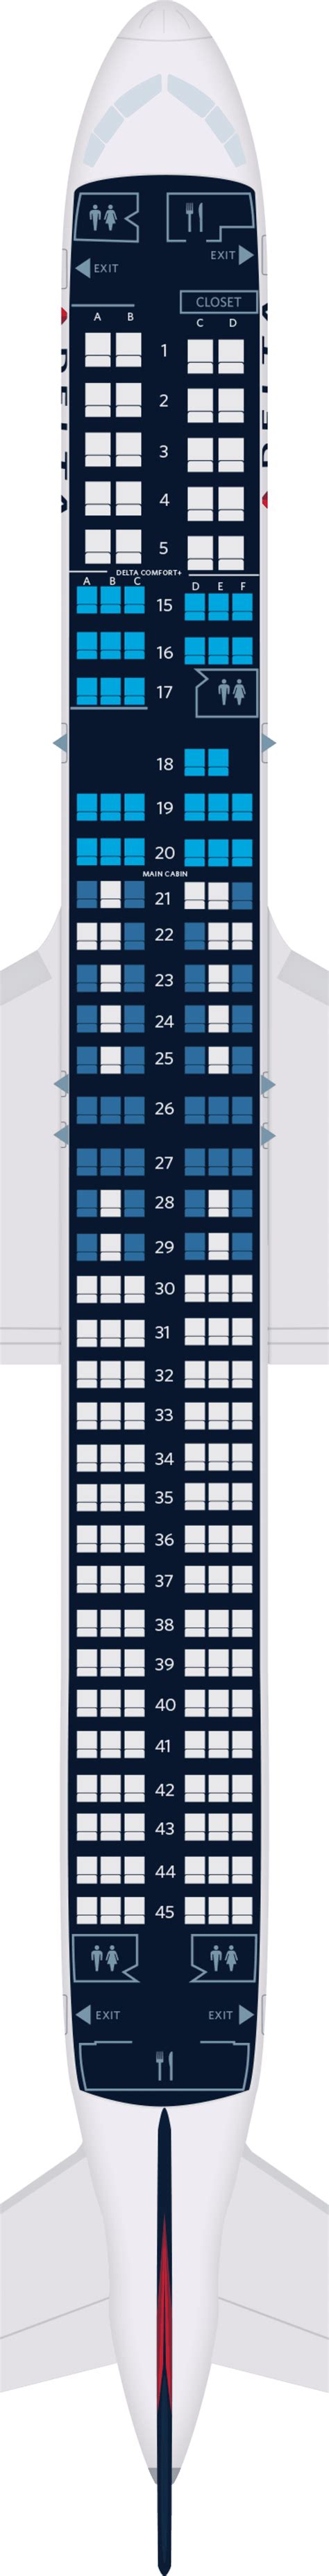 Boeing 757-200 Boeing 757-300 (75Y) Boeing 767-300ER ... Seat Map. Seat Map; EXITS (6) GALLEYS (2) LAVATORIES (3) (1 ACCESSIBLE) FIRST CLASS . DELTA COMFORT+. PREFERRED. ... All aisle seats; Delta Comfort+: All aisle seats; Main: All aisle seats; Our Aircraft. Airbus A220-100 (221) A220-300 (223). 